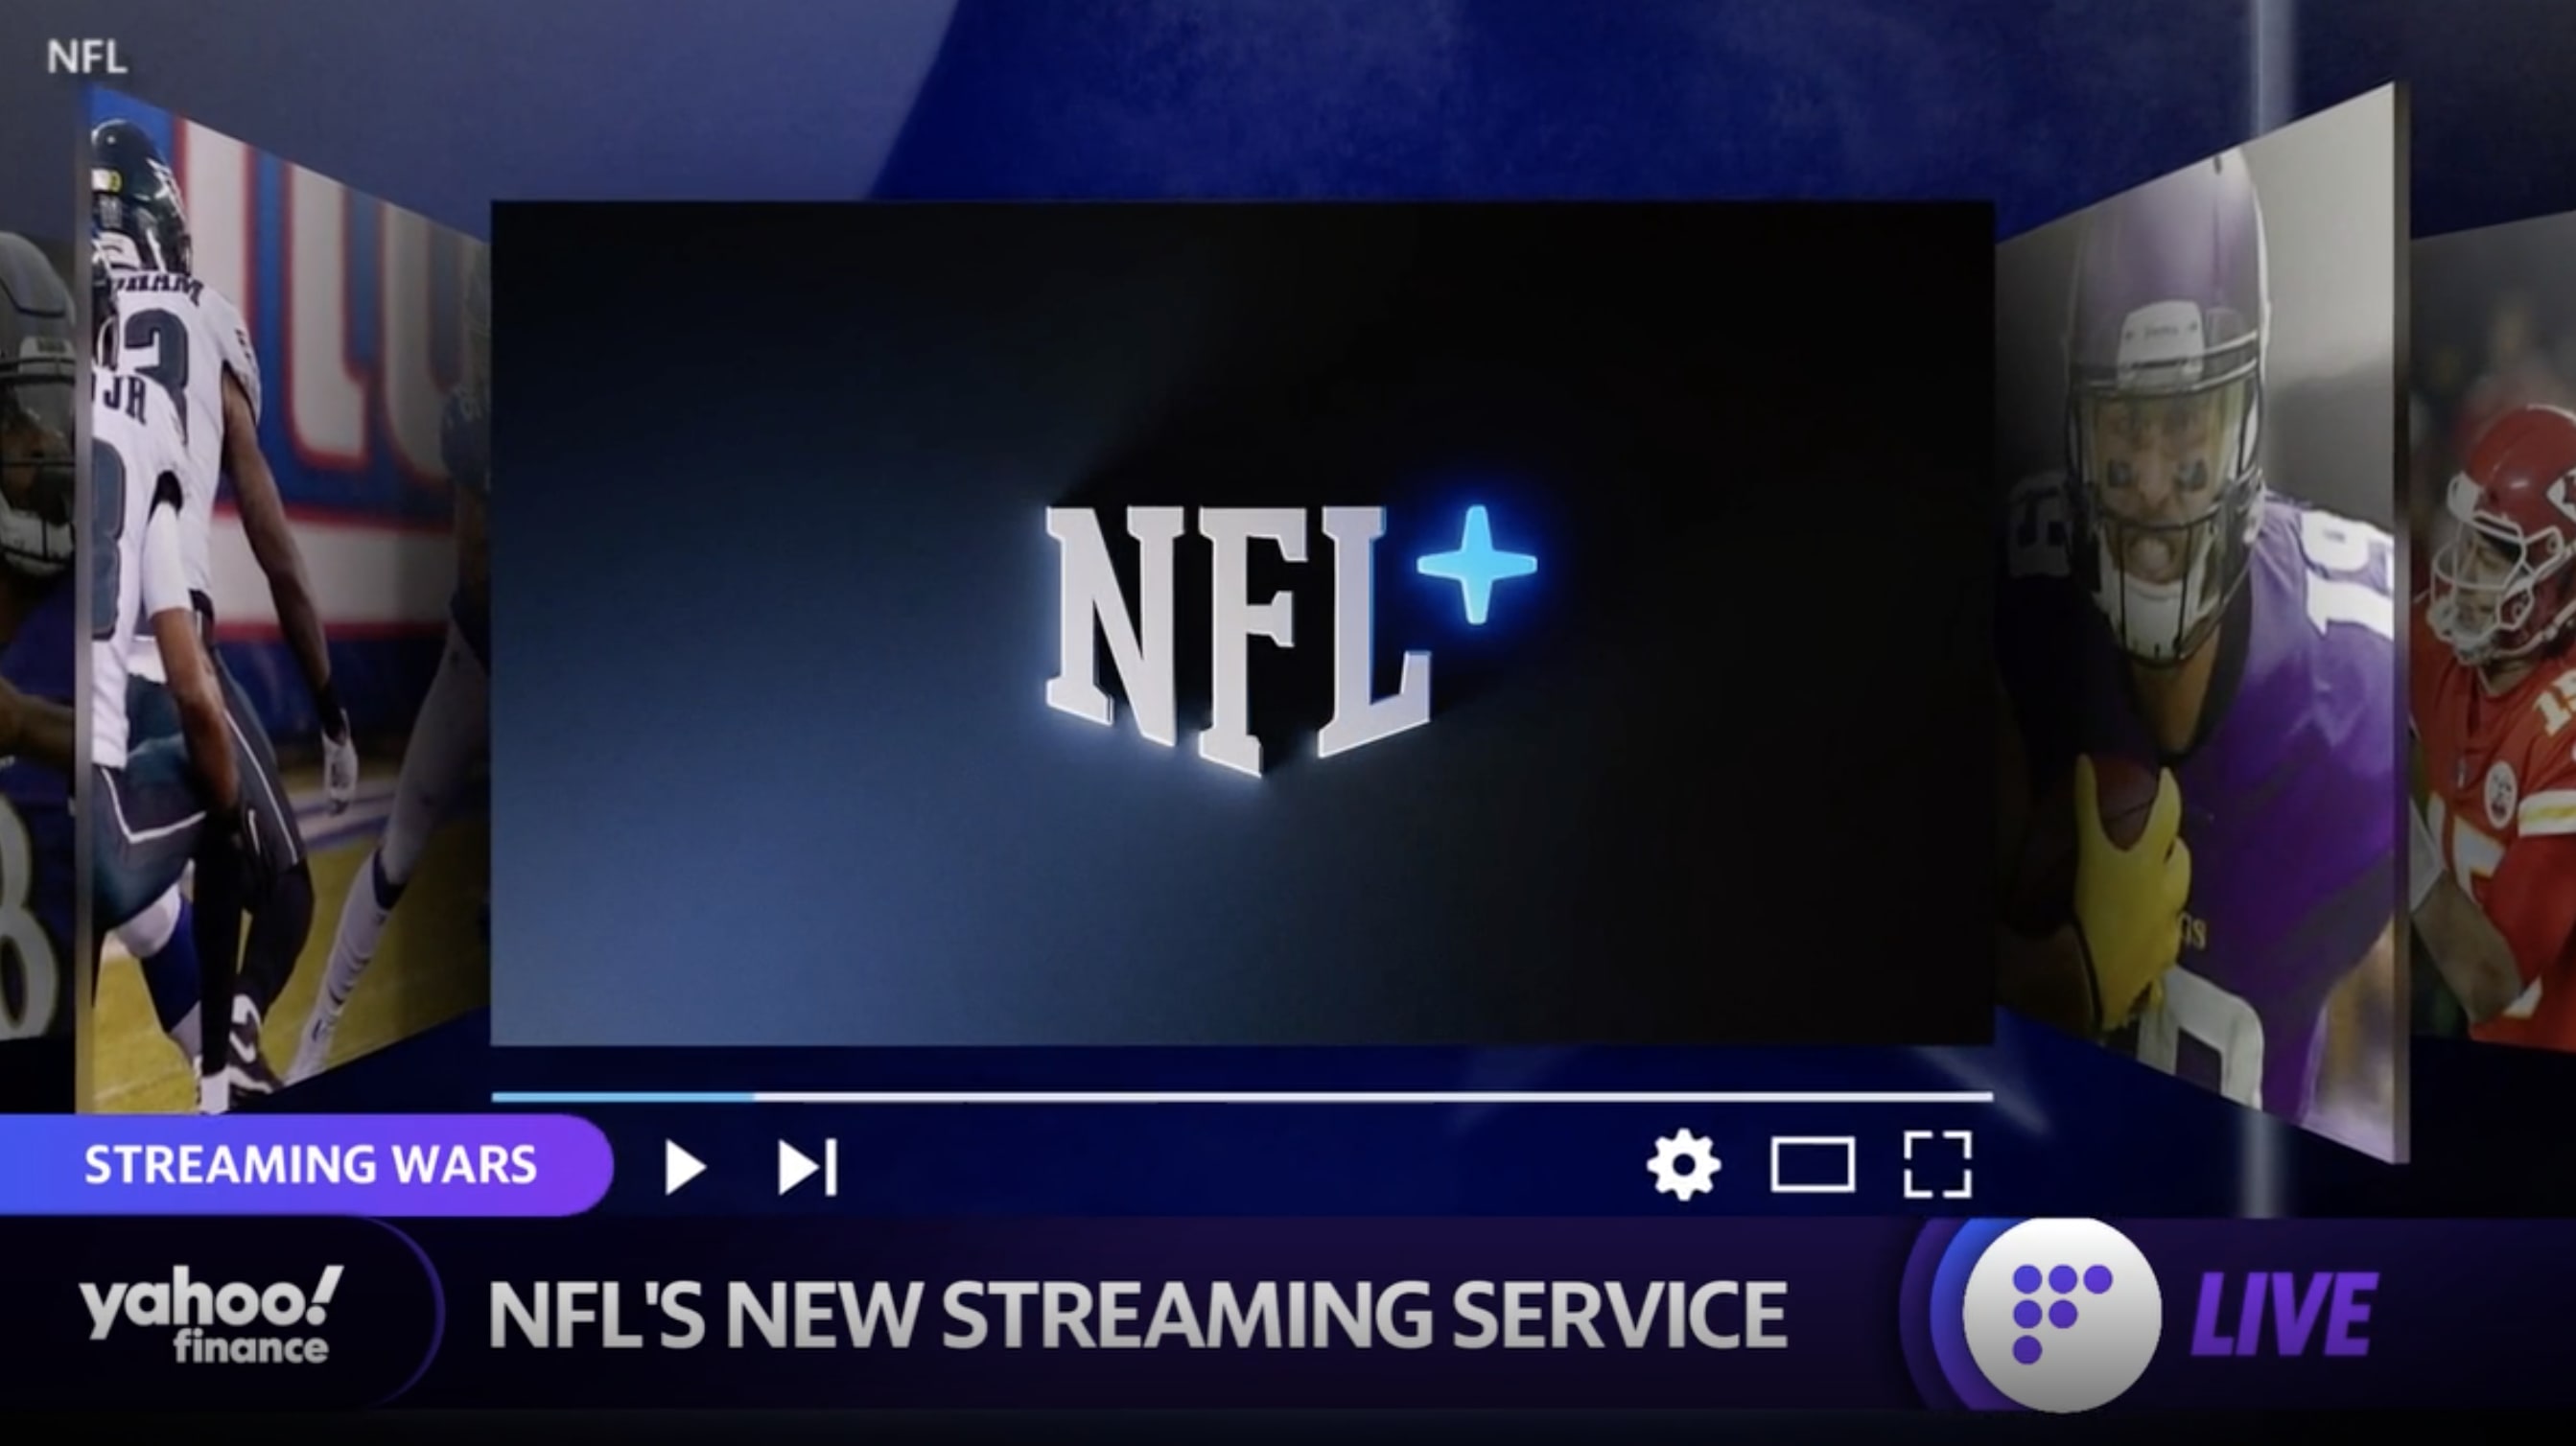 NFL+ streaming service launches for $4.99 per month